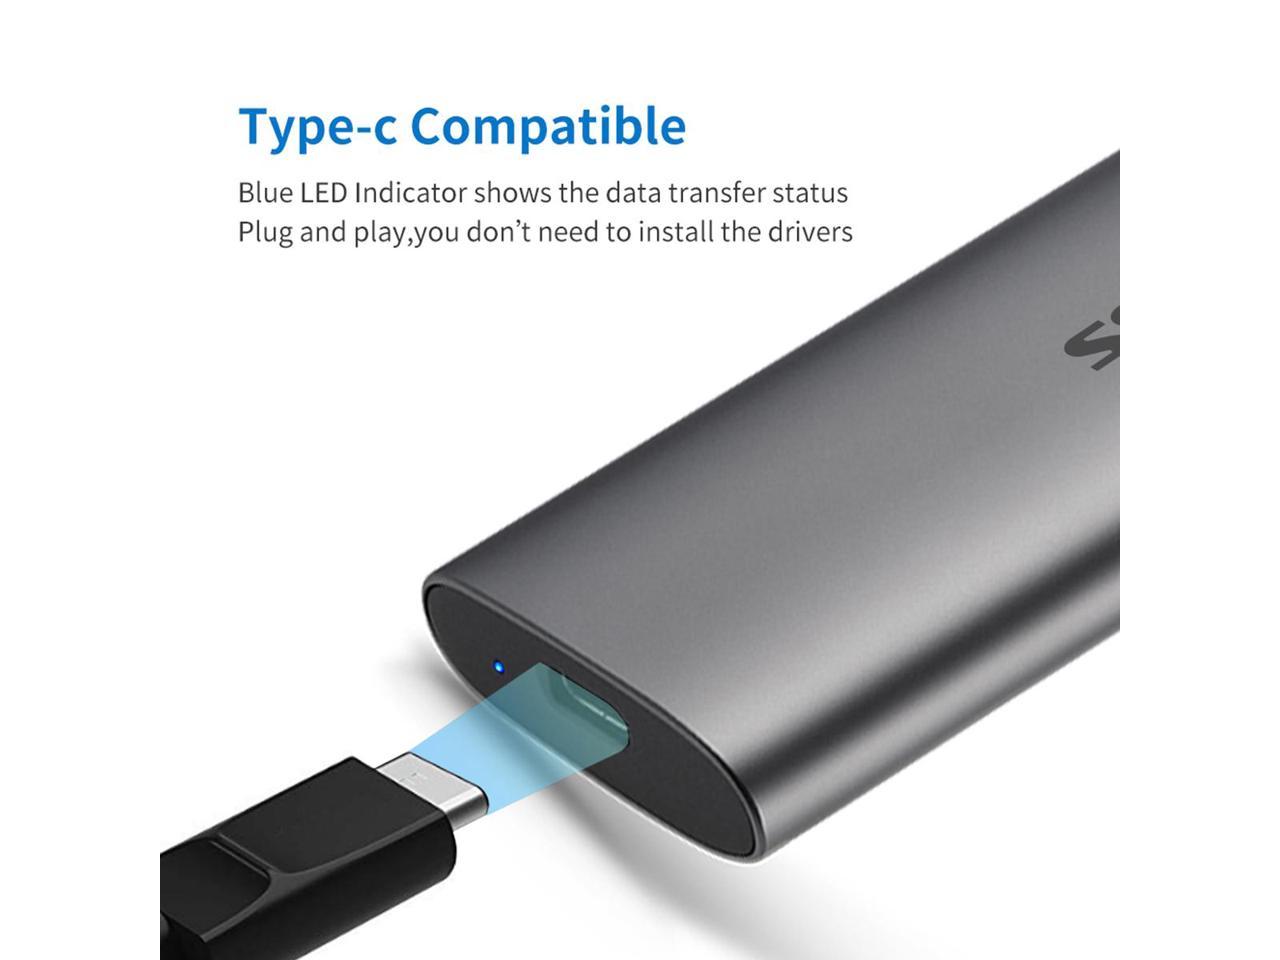 SSK 256G Portable External SSD,USB3.1 Gen2(6Gbps) Ultra Speed External  Solid State Drive USB-C Mini External SSD with 550MB/s Data Transfer for 